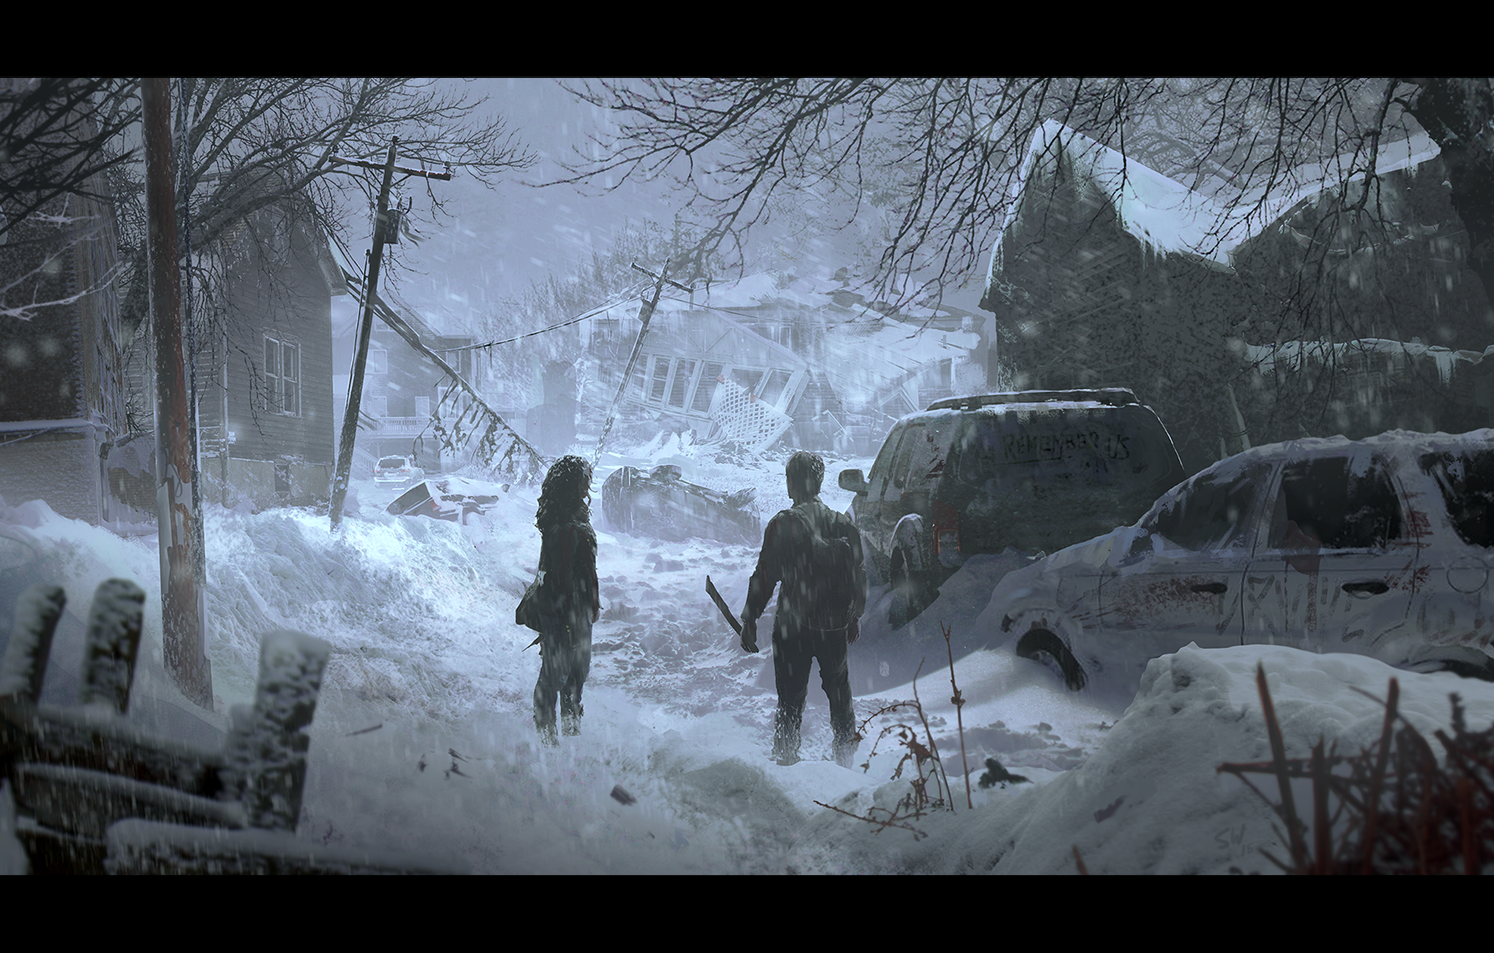 General 1494x953 The Last of Us snow abandoned apocalyptic video games video game art DeviantArt